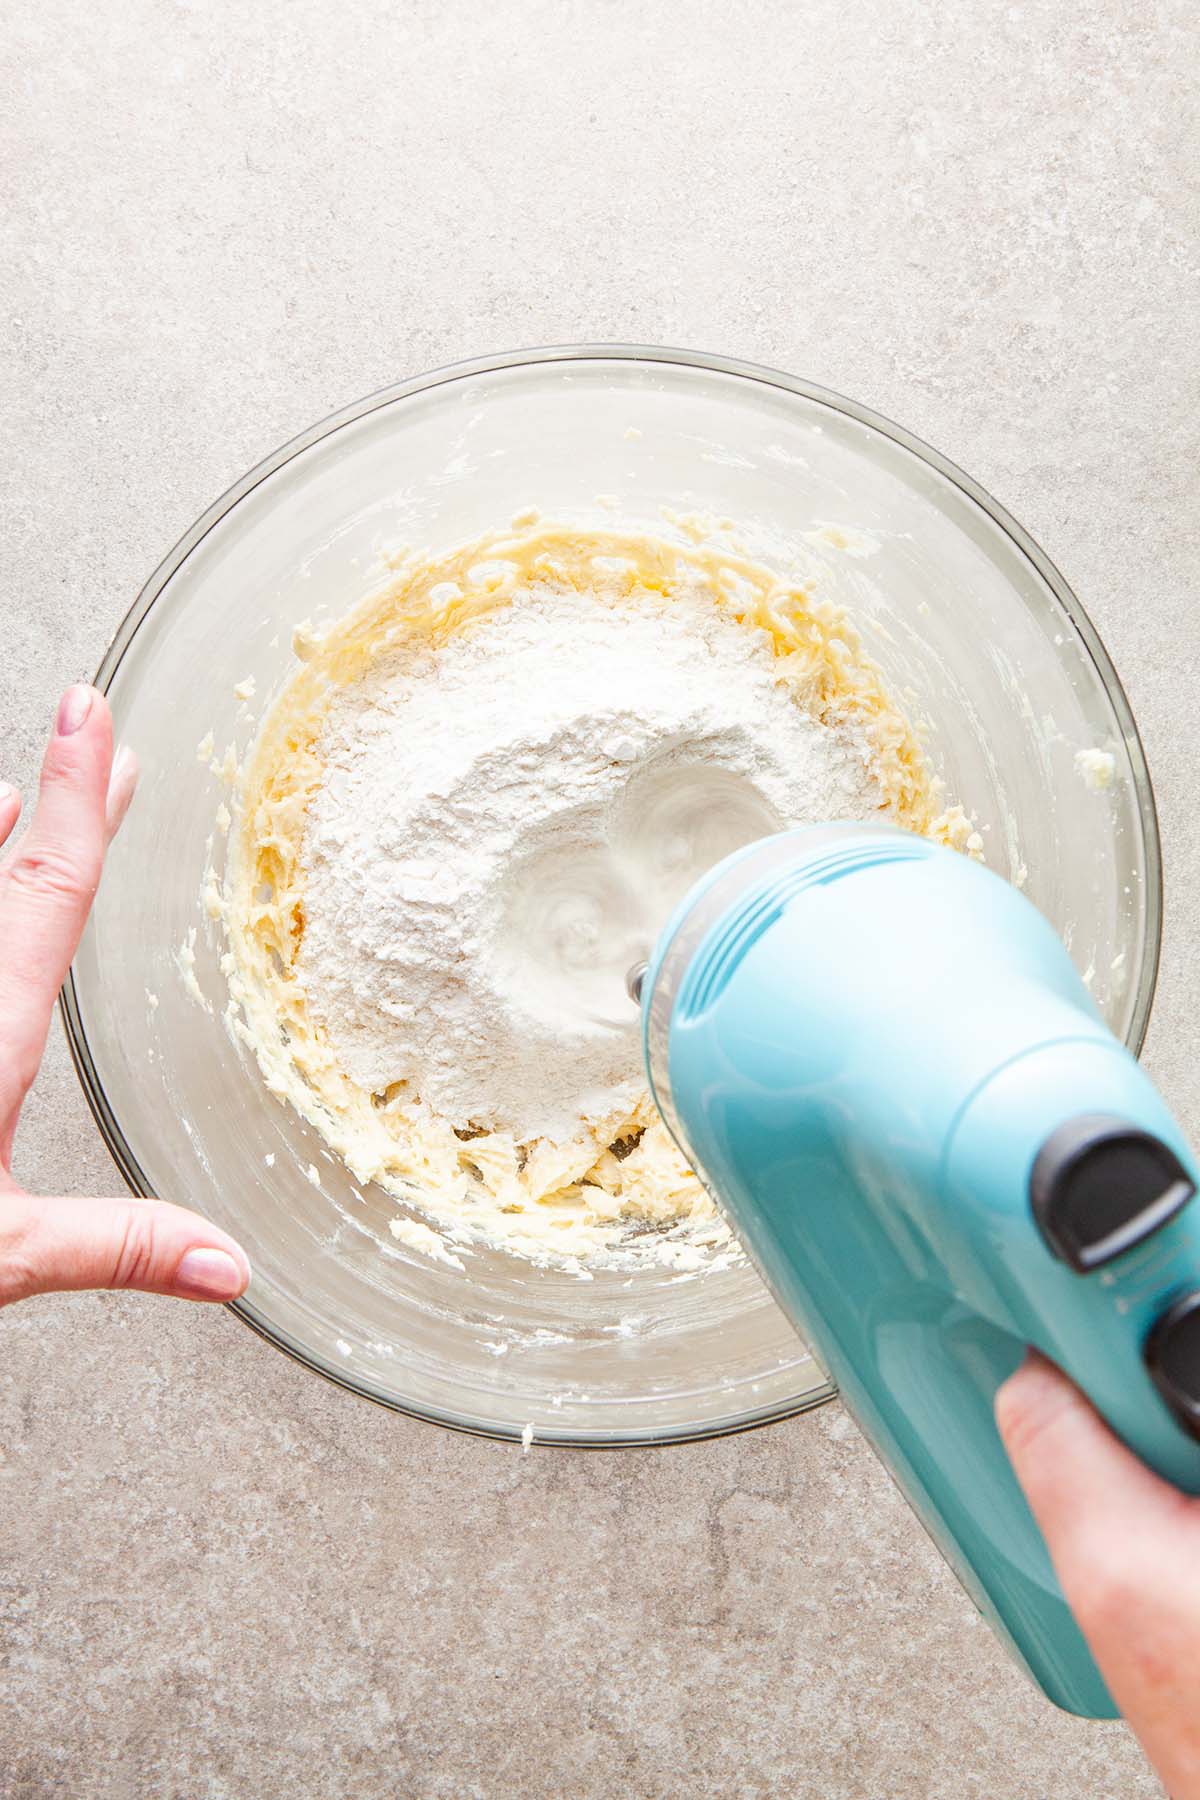 A hand holding a hand mixer to mix flour into butter in a glass bowl.